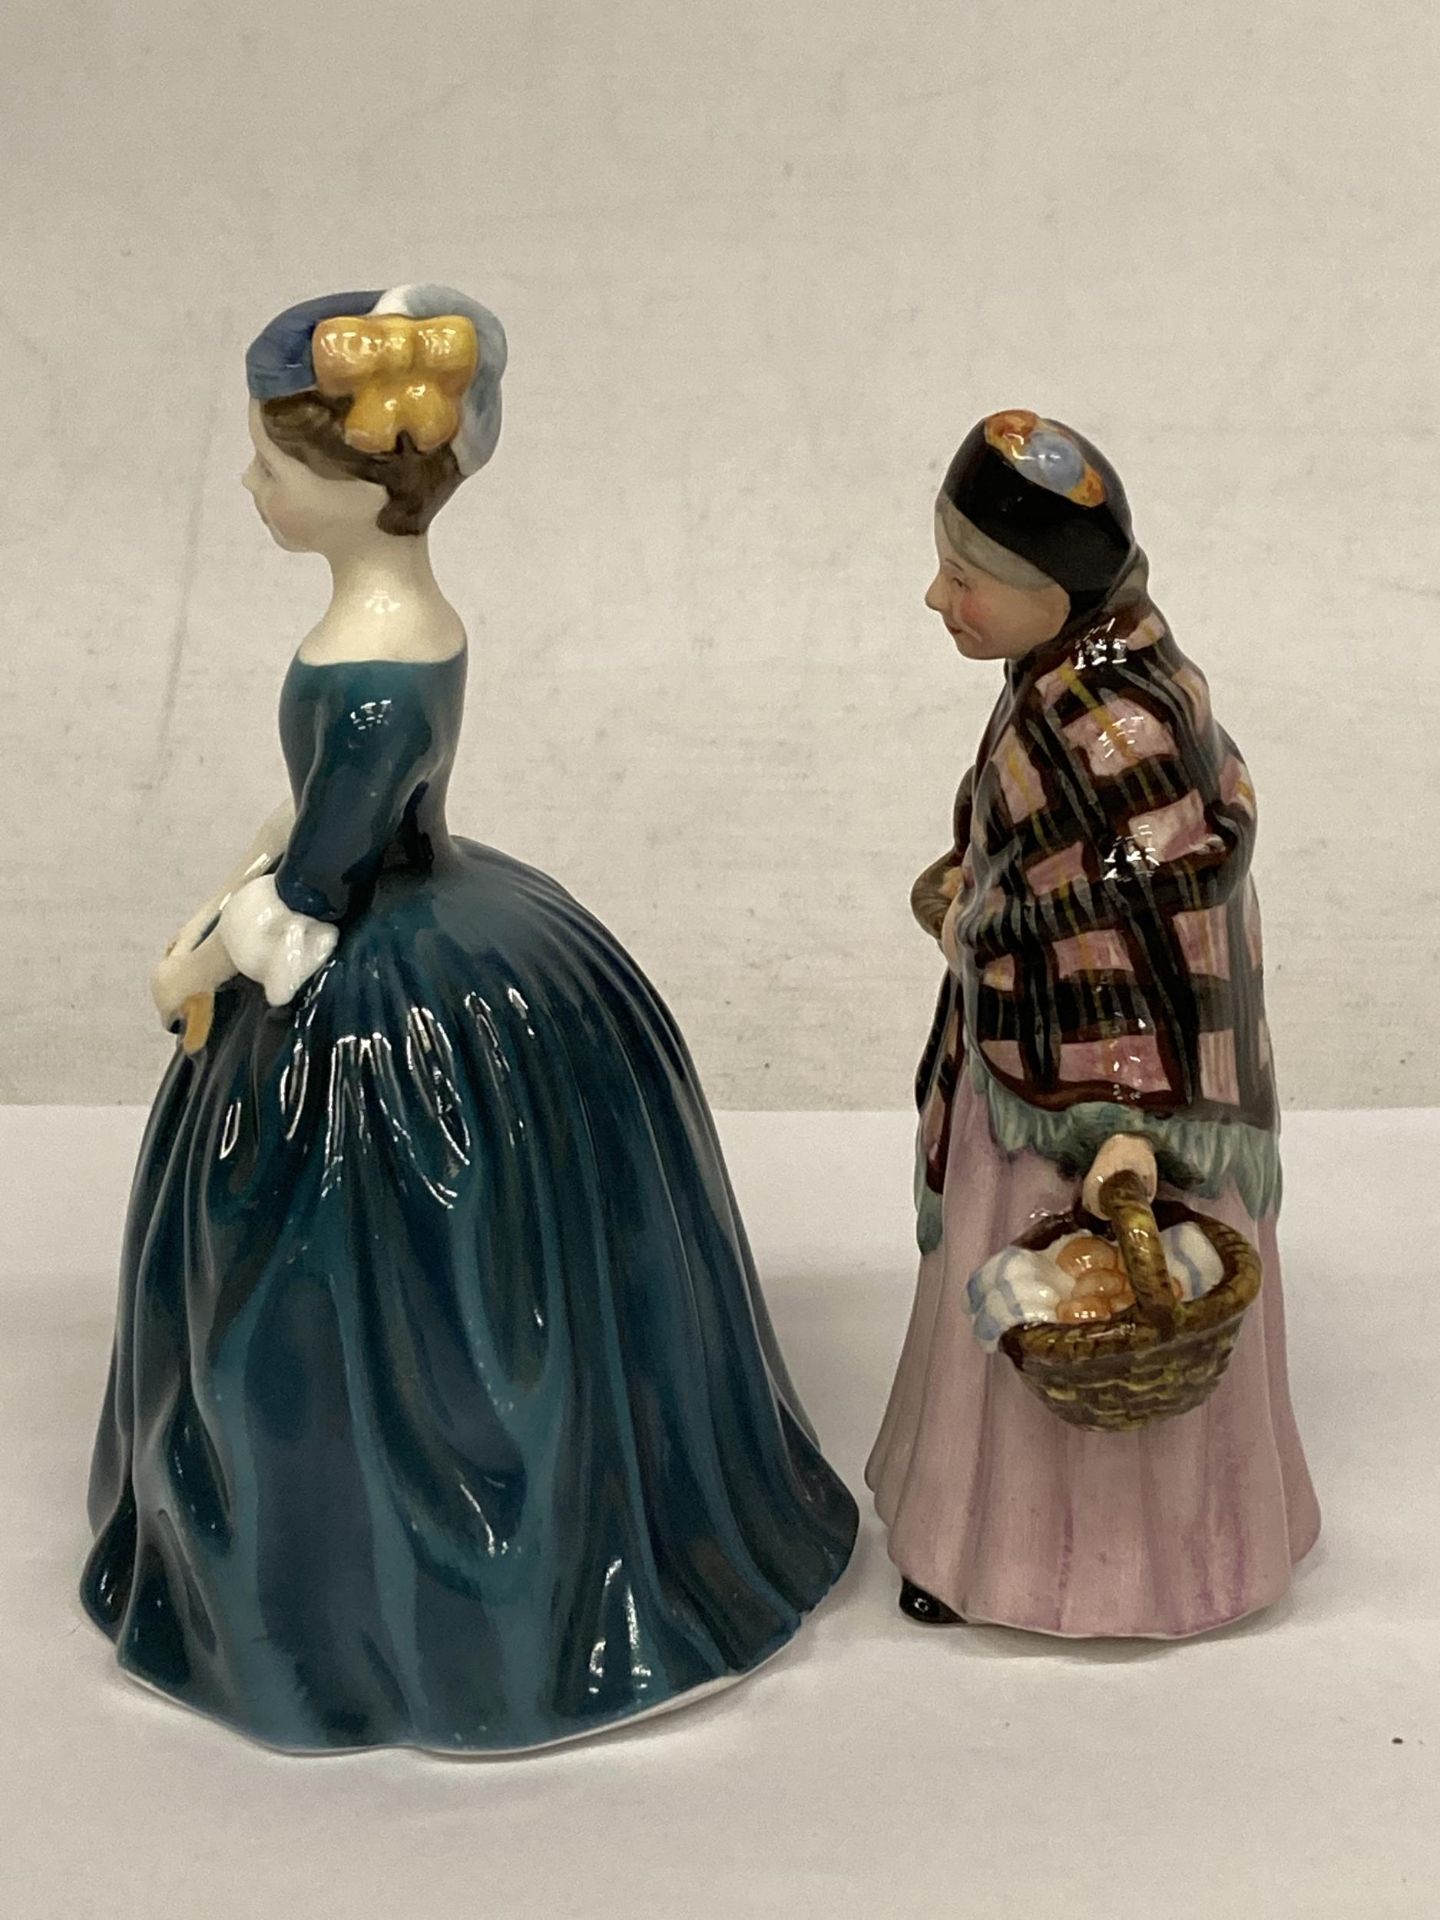 TWO ROYAL DOULTON FIGURINES "THE ORANGE LADY" FROM THE MINIATURE STREET VENDORS AND CHERIE HN2341 - Bild 3 aus 4